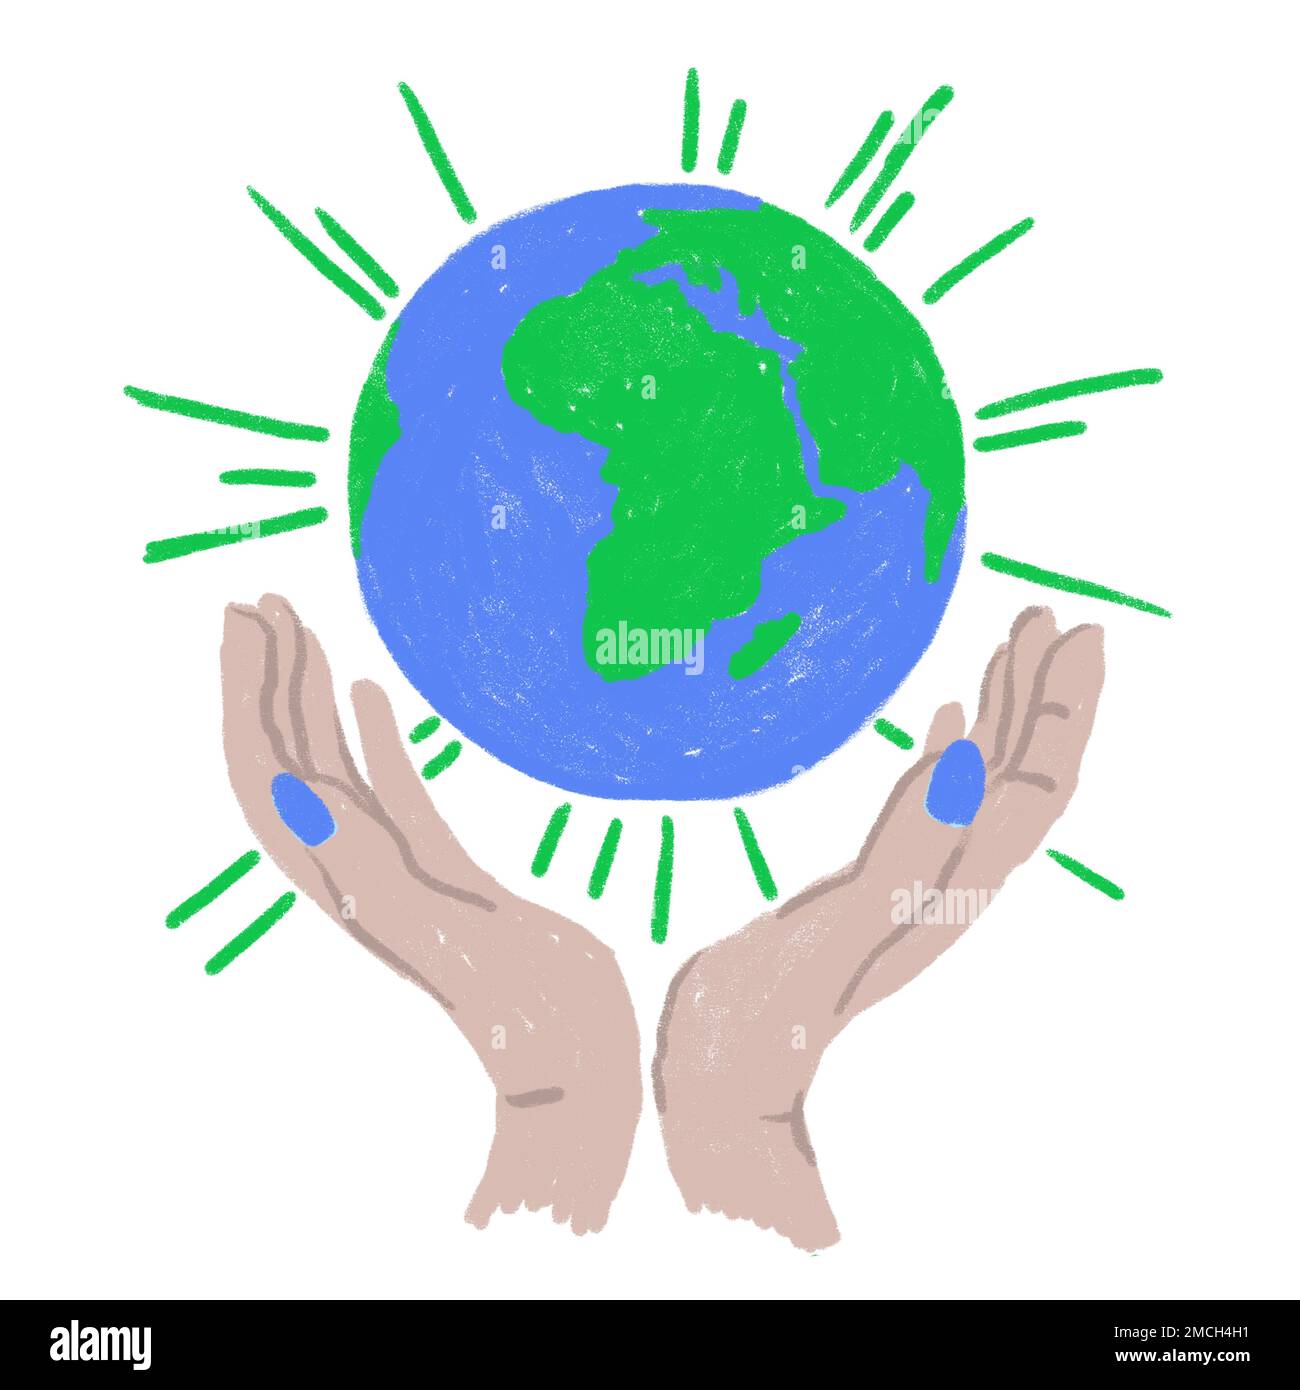 Hand drawn illustration of Earth Day globe planet ecology protection, human hands holding. Blue green sphere with ocean land, ecological environmental concept, pollution icon symbol, cartoon style Stock Photo